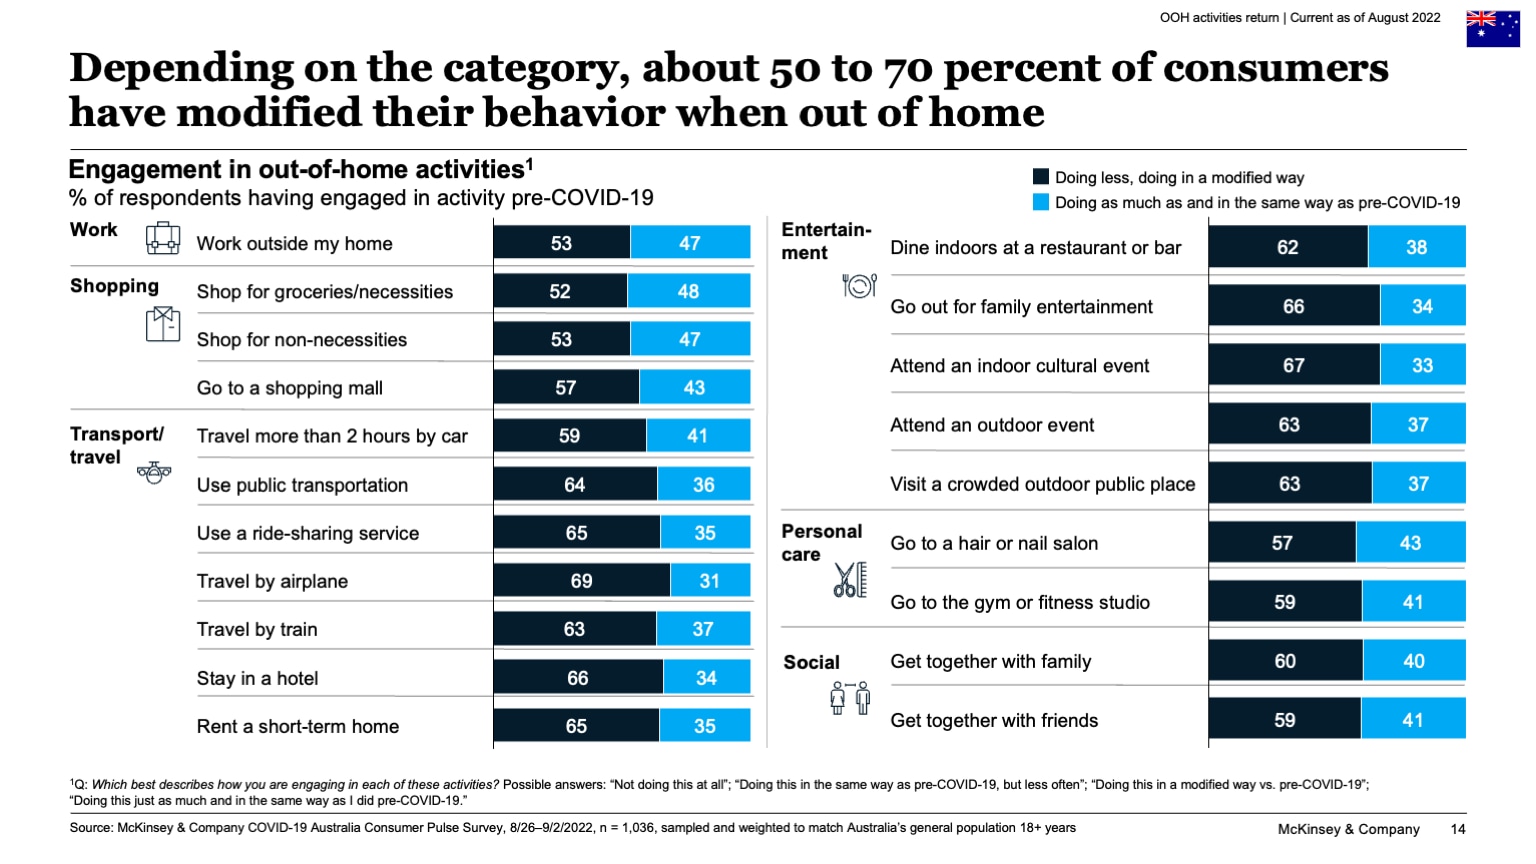 Depending on the category, about 50 to 70 percent of consumers have modified their behavior when out of home